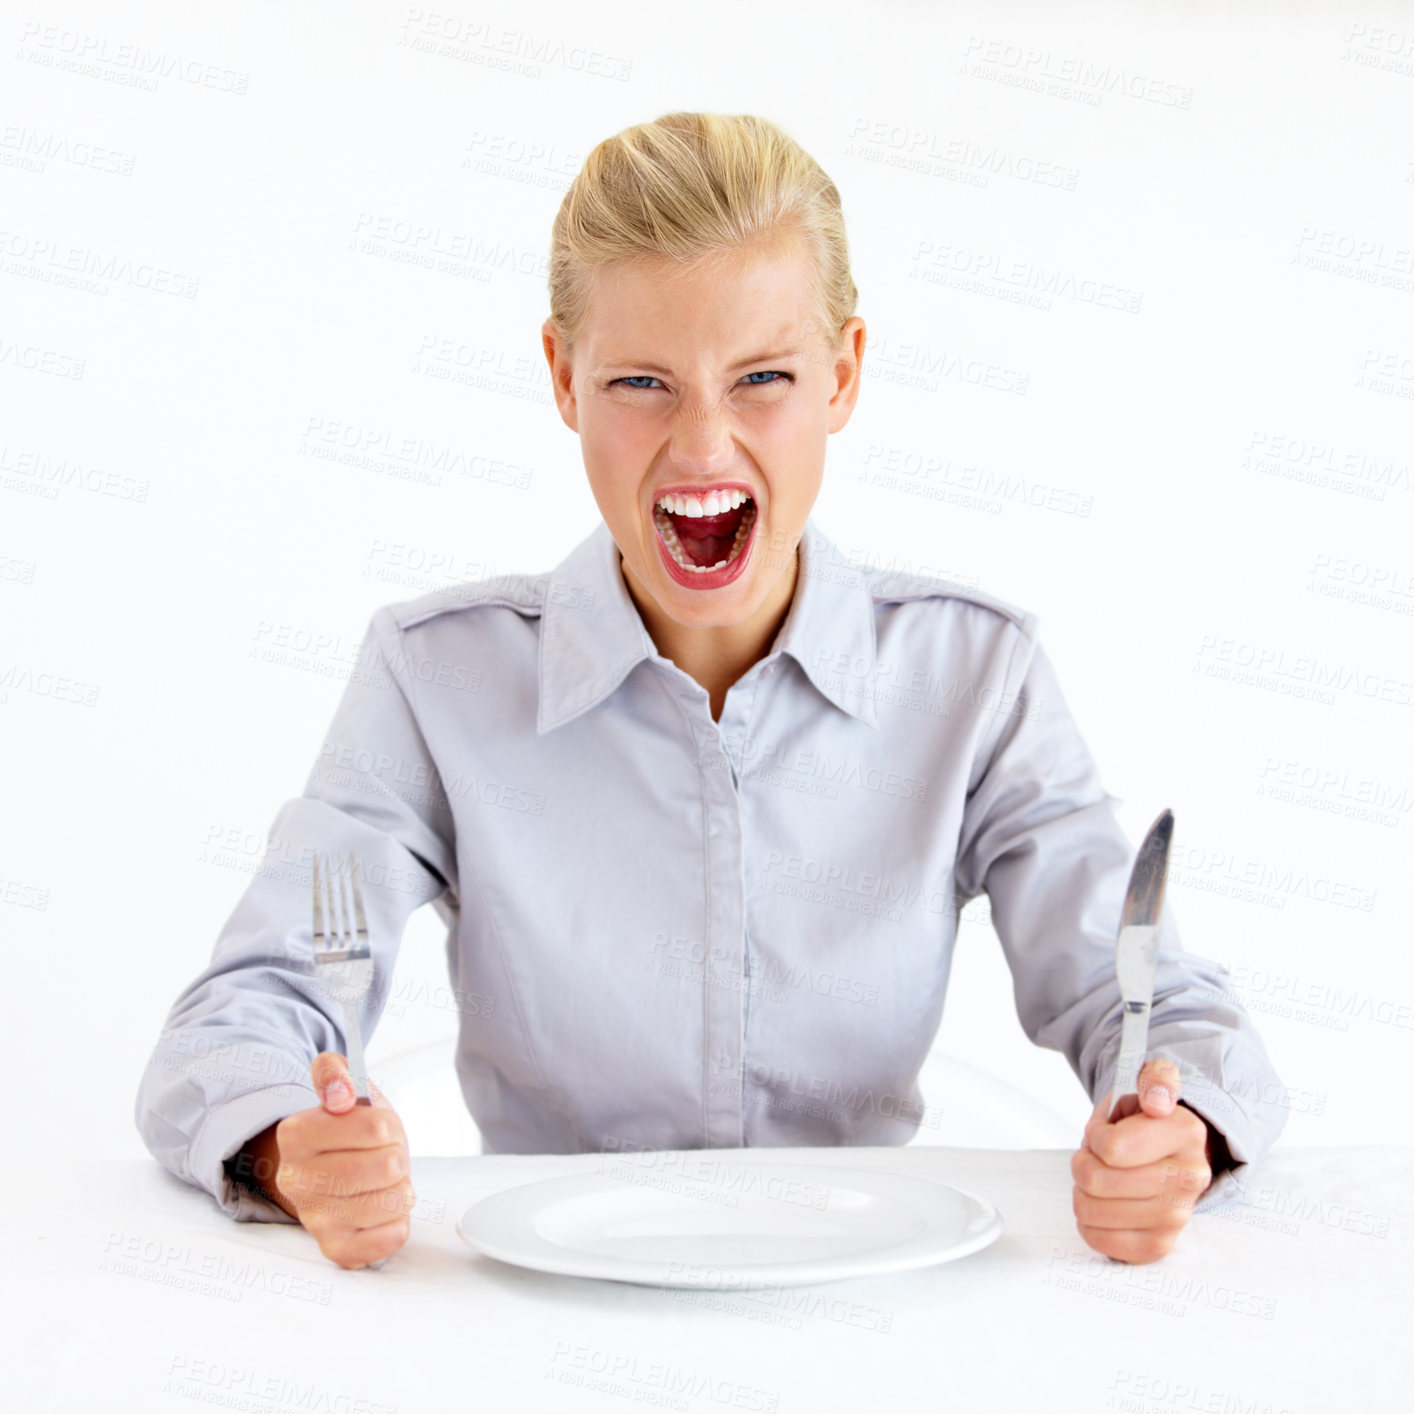 Buy stock photo Furious young woman sitting in front of an empty plate while holding her knife and fork